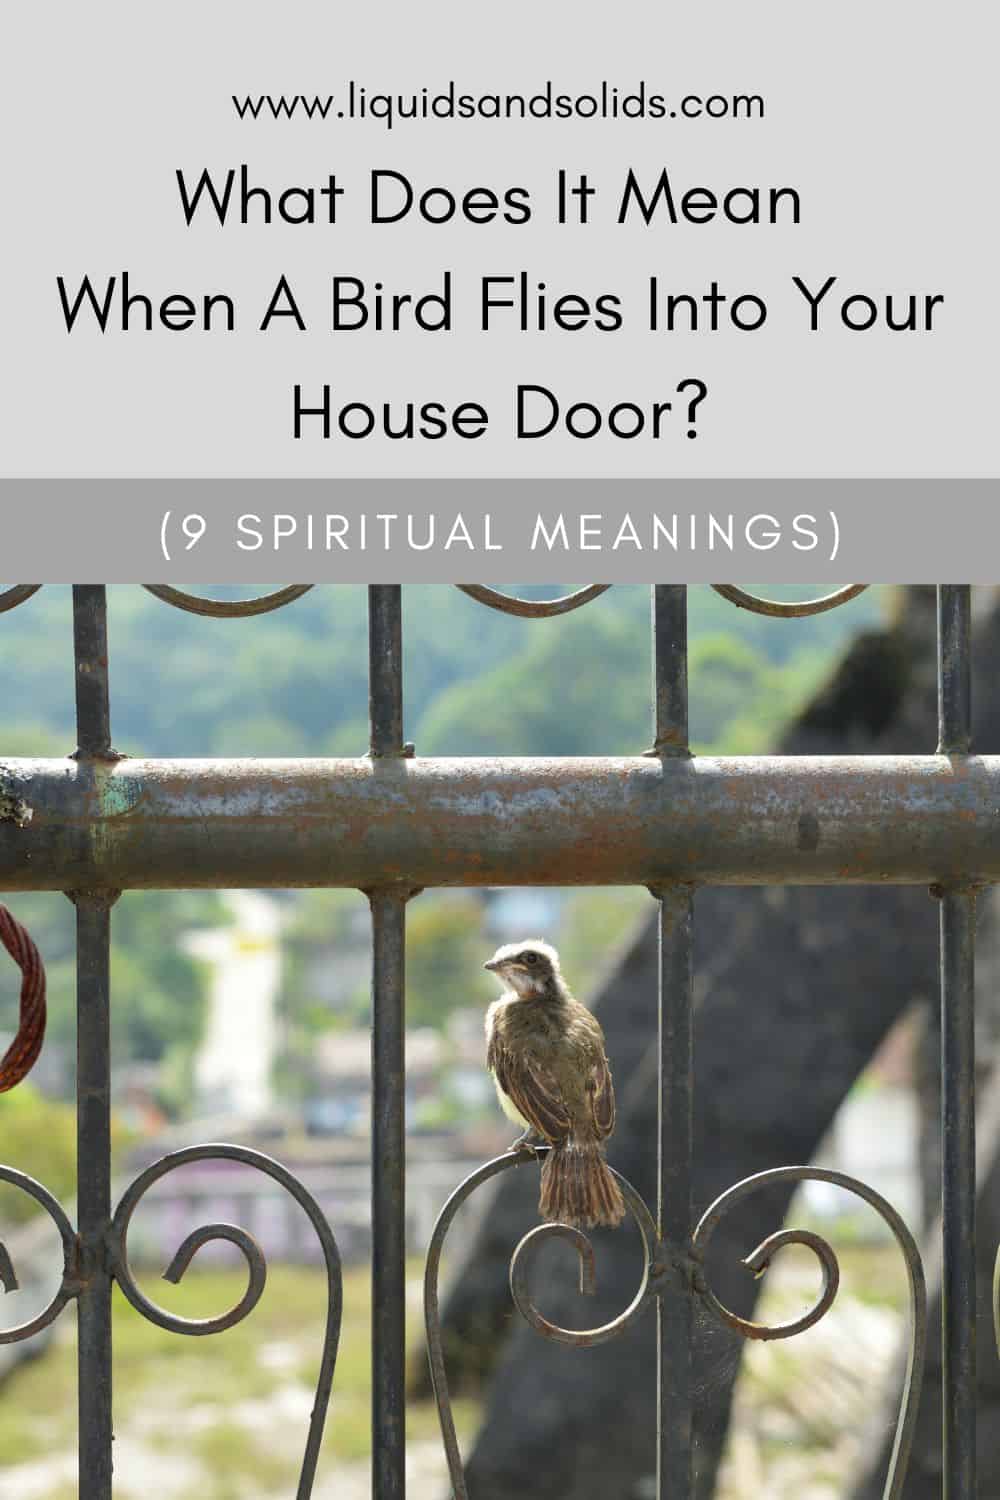 What Does It Mean When A Bird Flies Into Your House Door? (9 Spiritual Meanings)